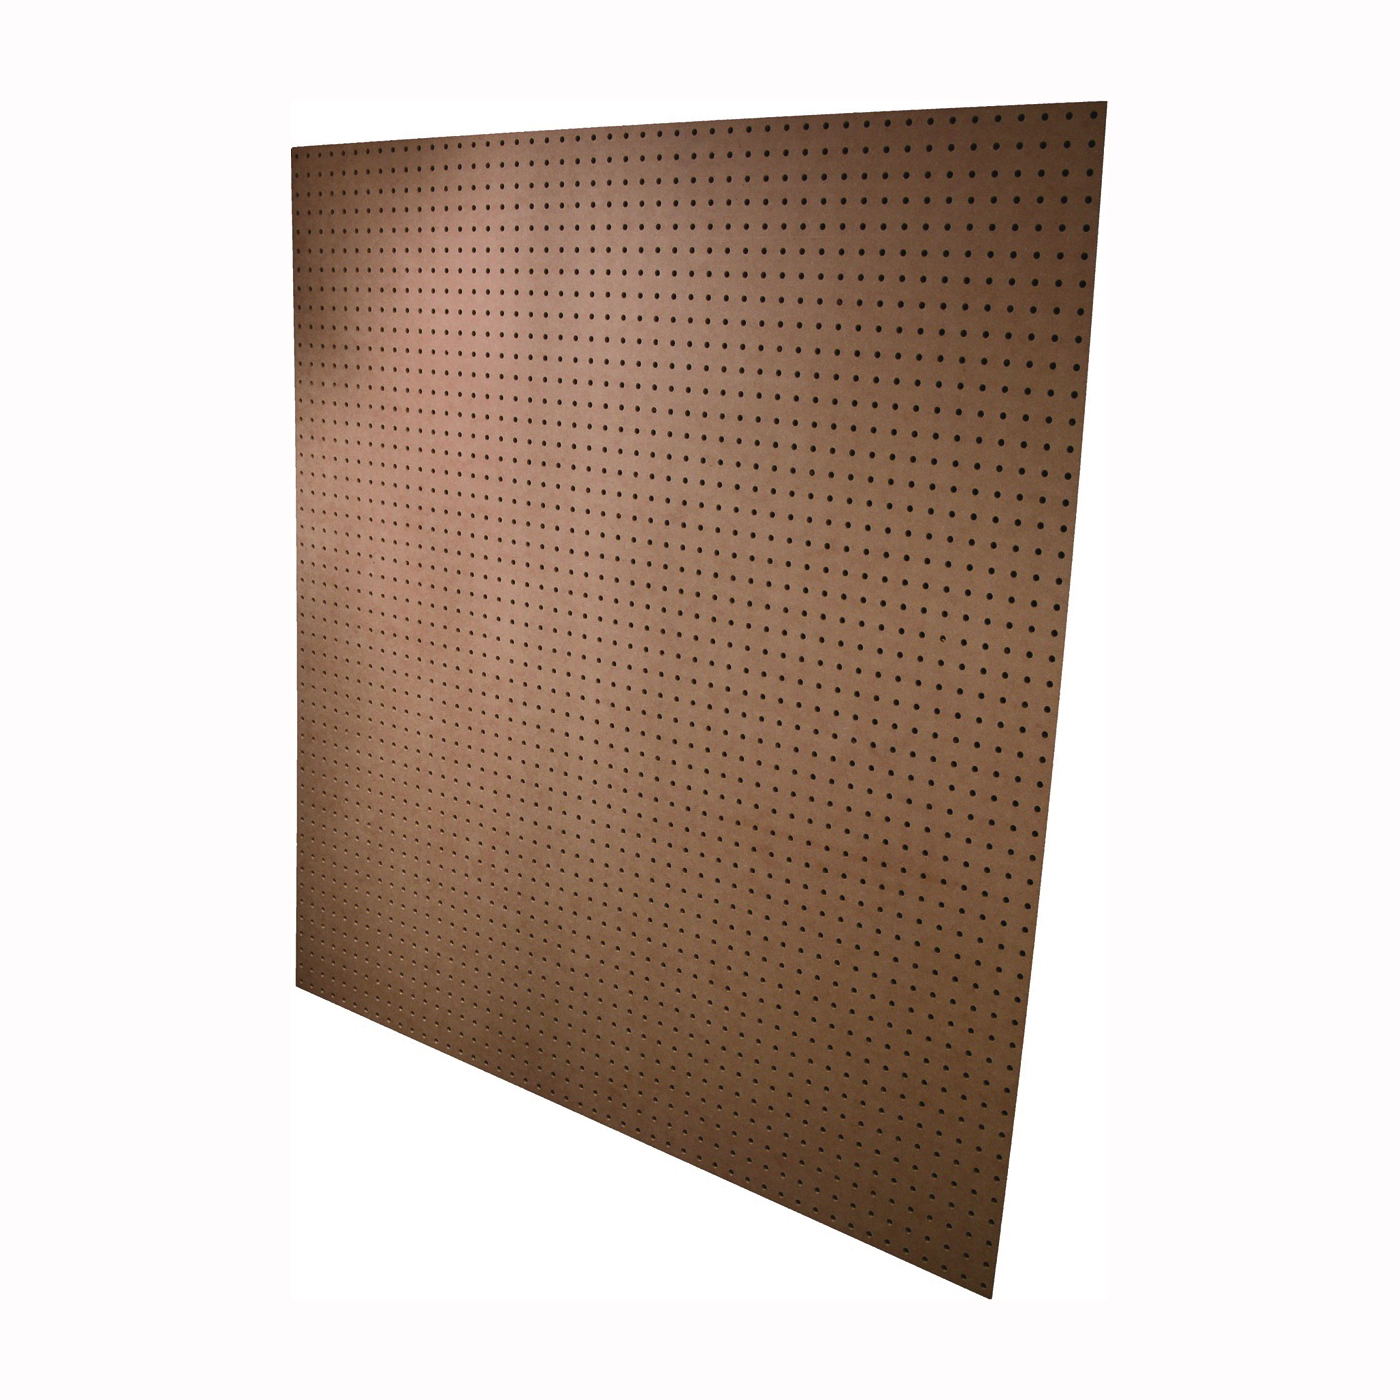 ALEXANDRIA Moulding PG002-6H048C Standard Perforated Hardboard, 4 ft OAW, 4 ft OAH, Plywood - 1